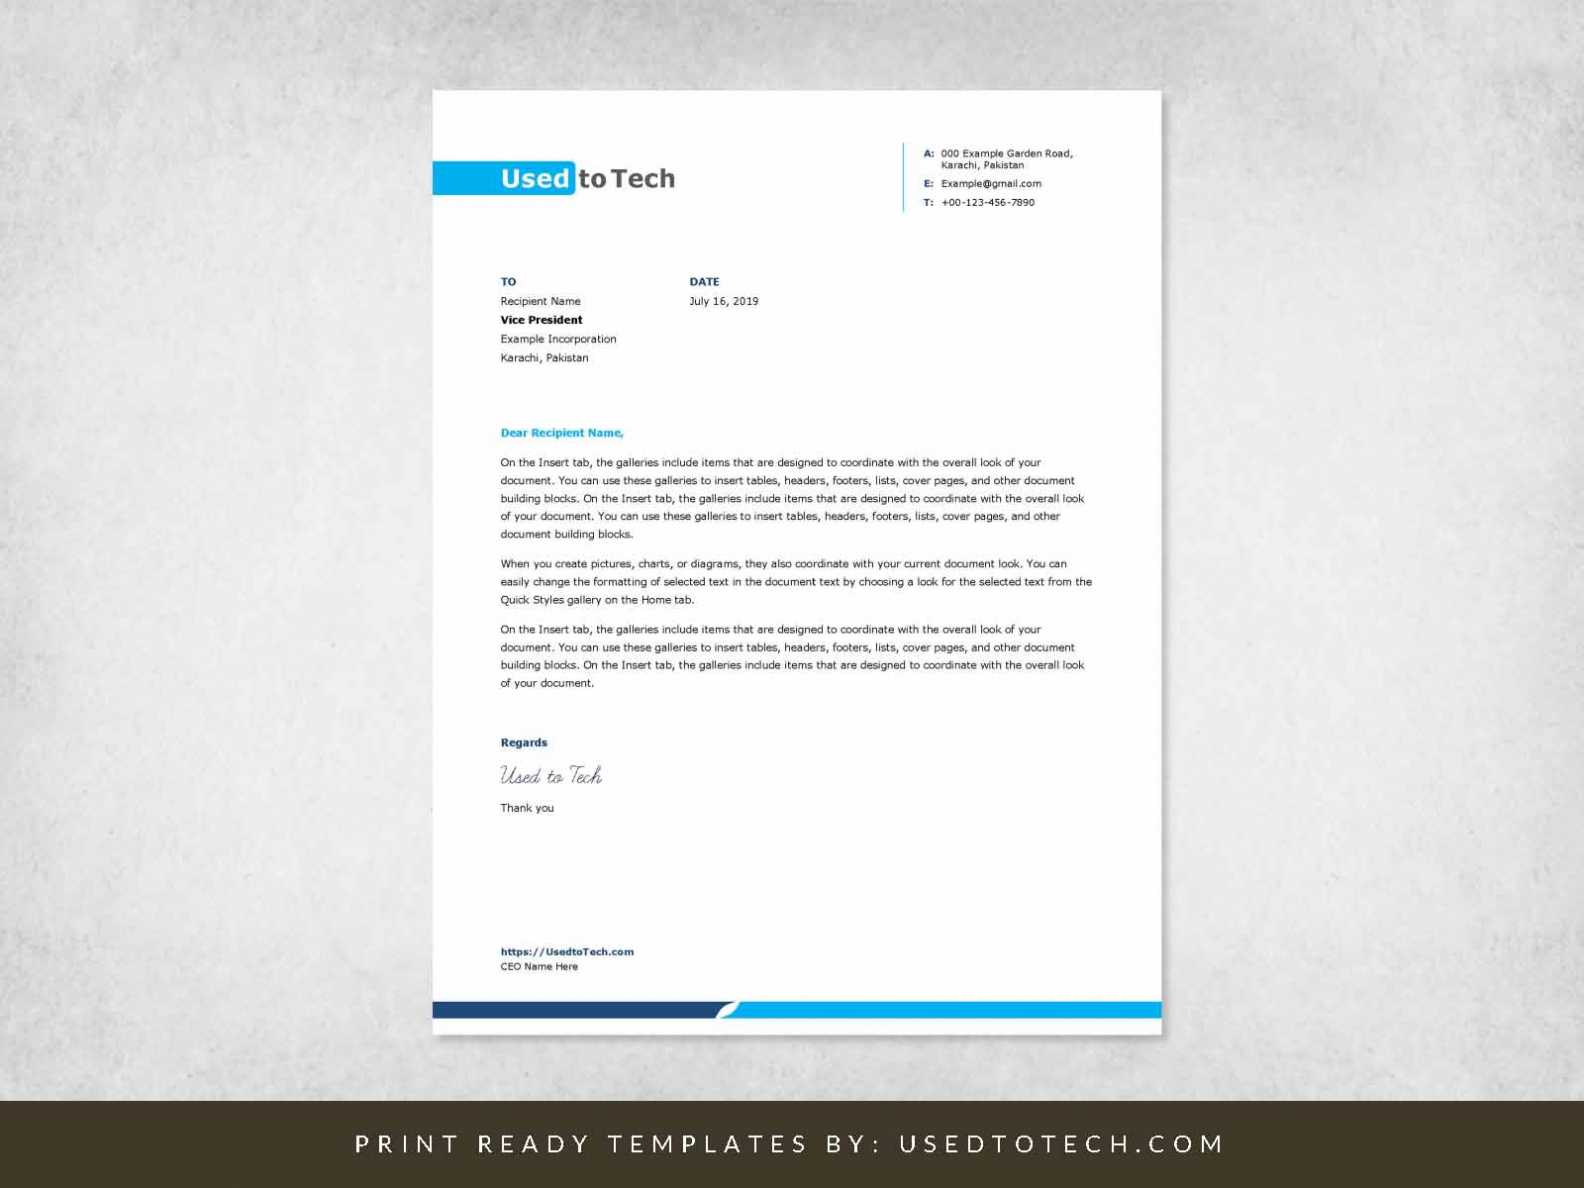 Simple And Clean Word Letterhead Template - Free - Used To Tech pertaining to Free Letterhead Templates For Microsoft Word